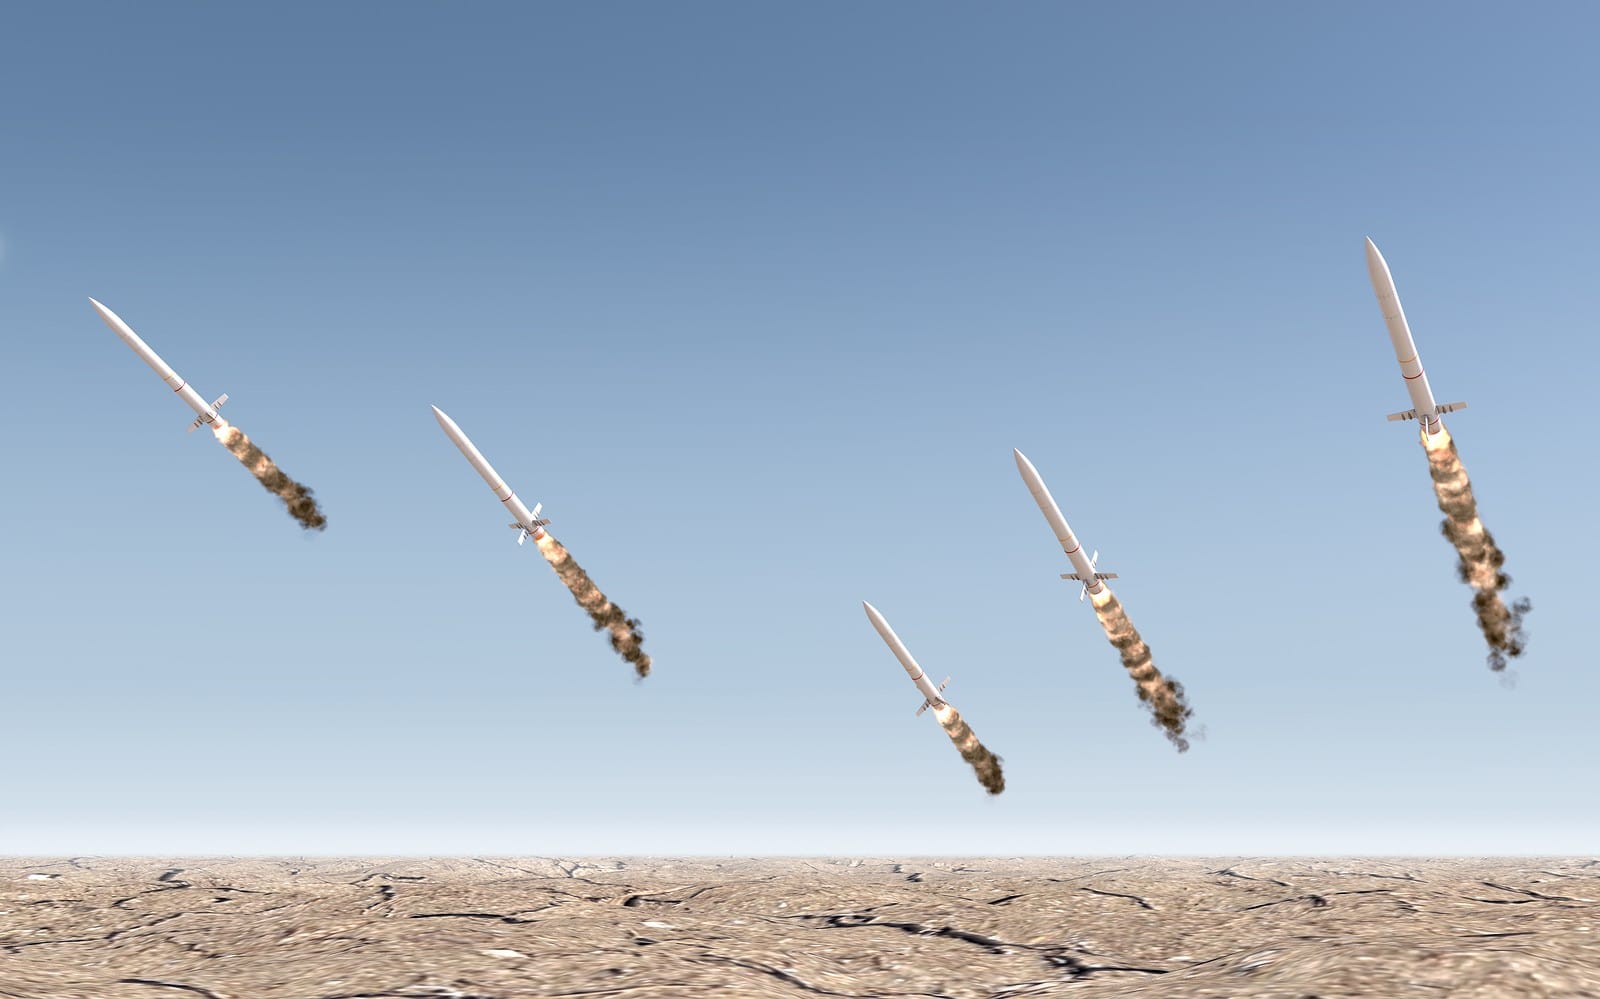 A row of intercontinental ballistic missiles launching in a desert on a blue sky backgrund - 3D render